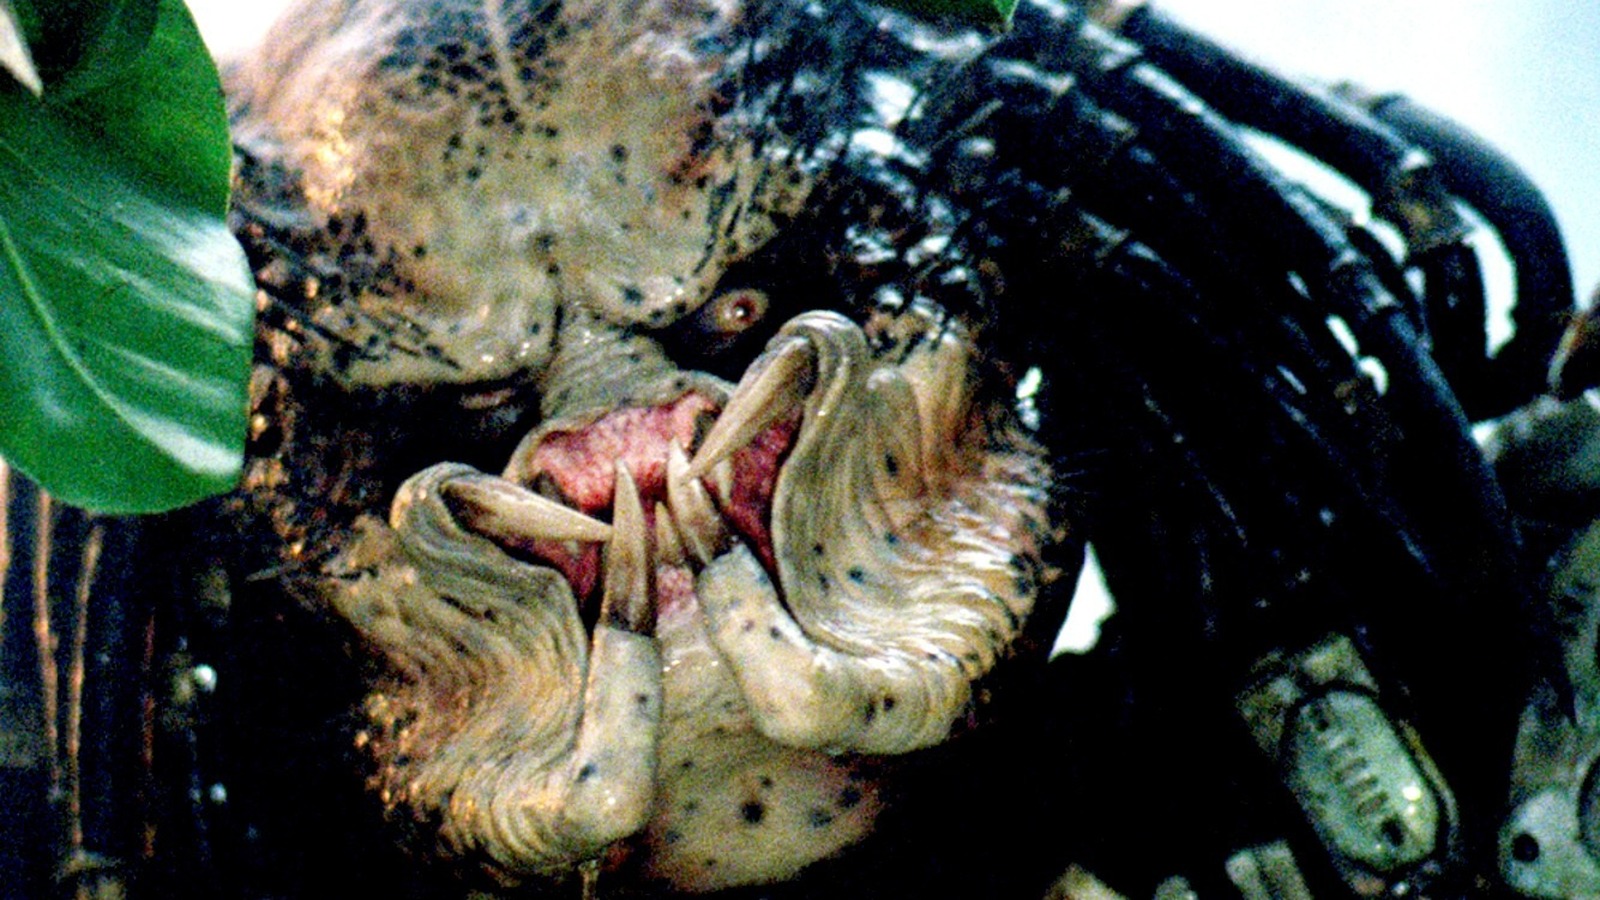 The Predator's Most Famous Feature Came From The Mind Of James Cameron